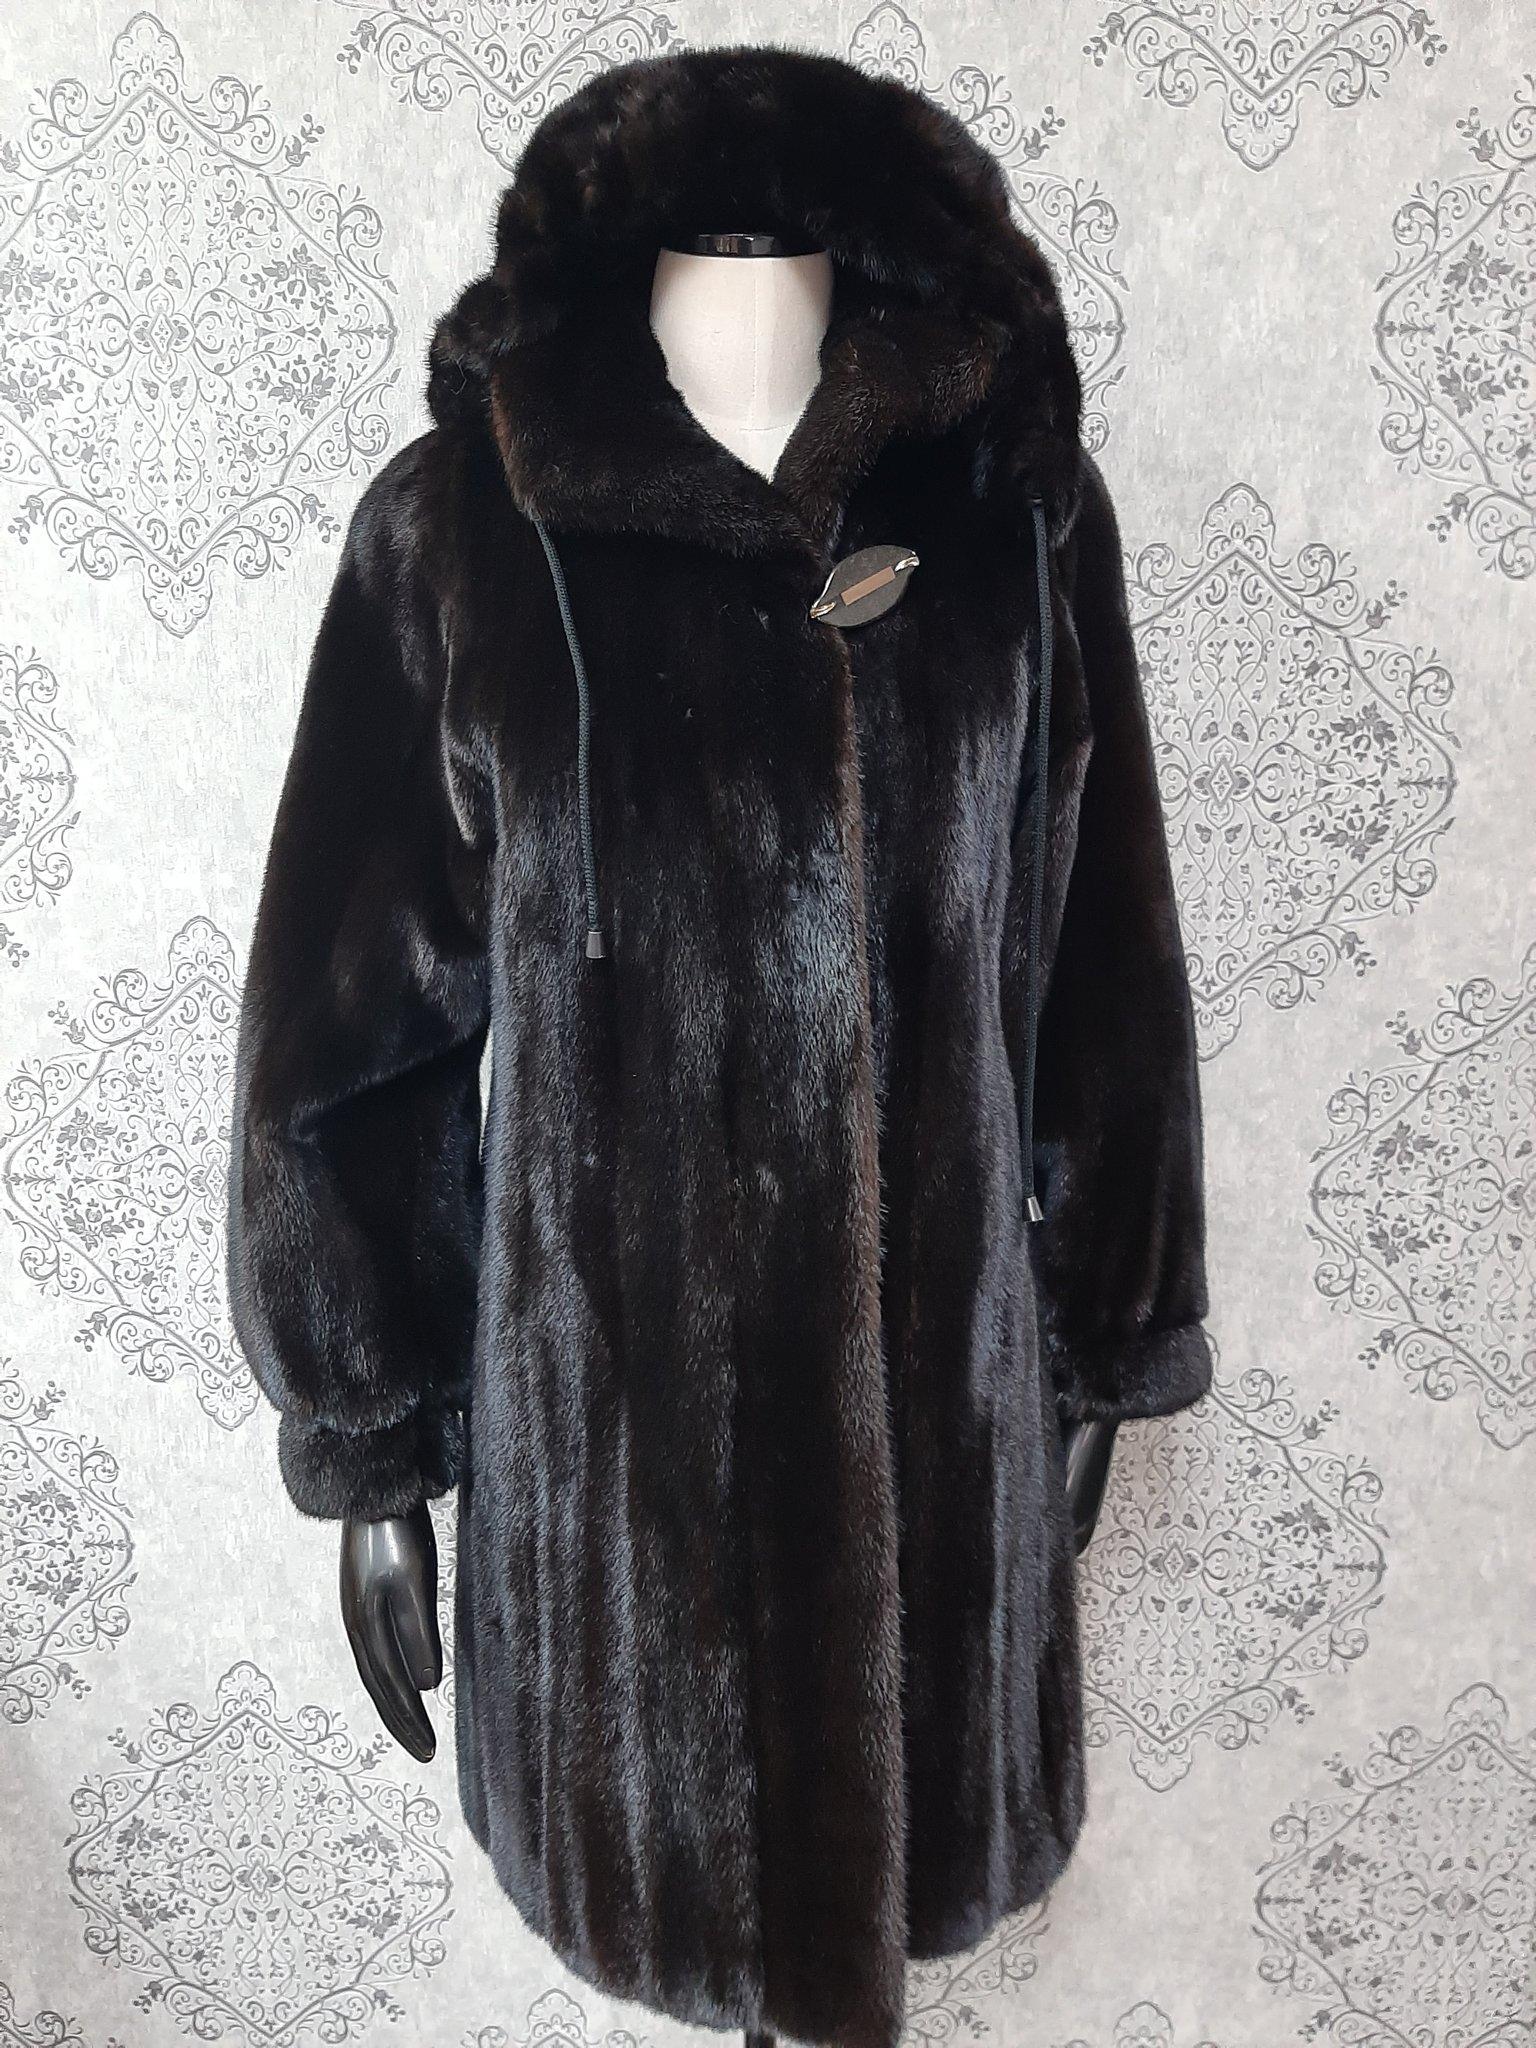 PRODUCT DESCRIPTION:

Brand new luxurious Mink fur coat with a hood

Condition: Brand New

Closure: Buttons

Color: Brown

Material: Mink

Garment type: Coat

Sleeves: Princess cuffs

Pockets: two pockets

Collar: Short collar

Lining: Shirred Silk